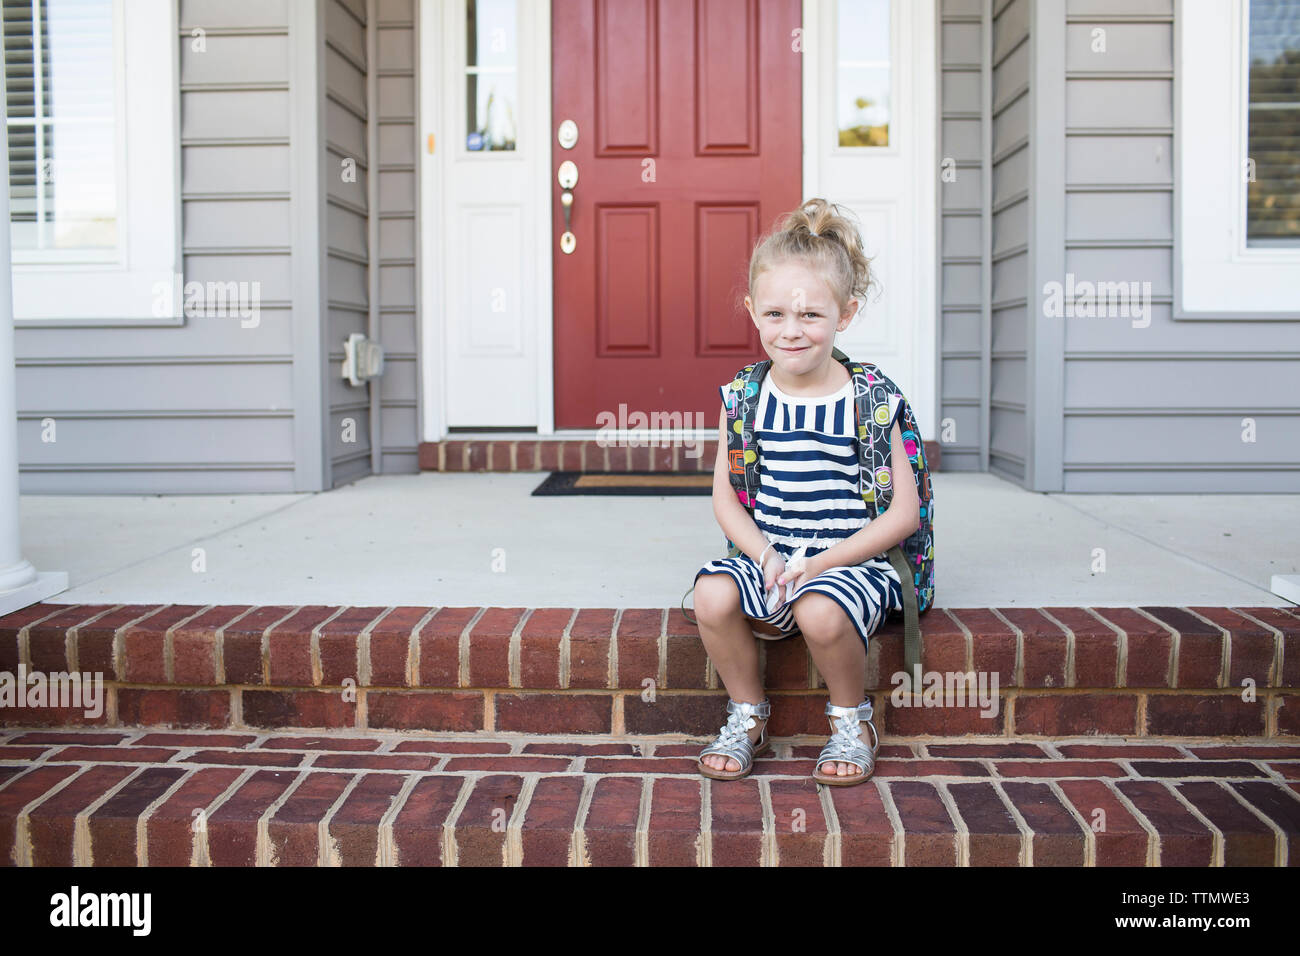 Portrait of schoolgirl sitting on steps in front of house Stock Photo